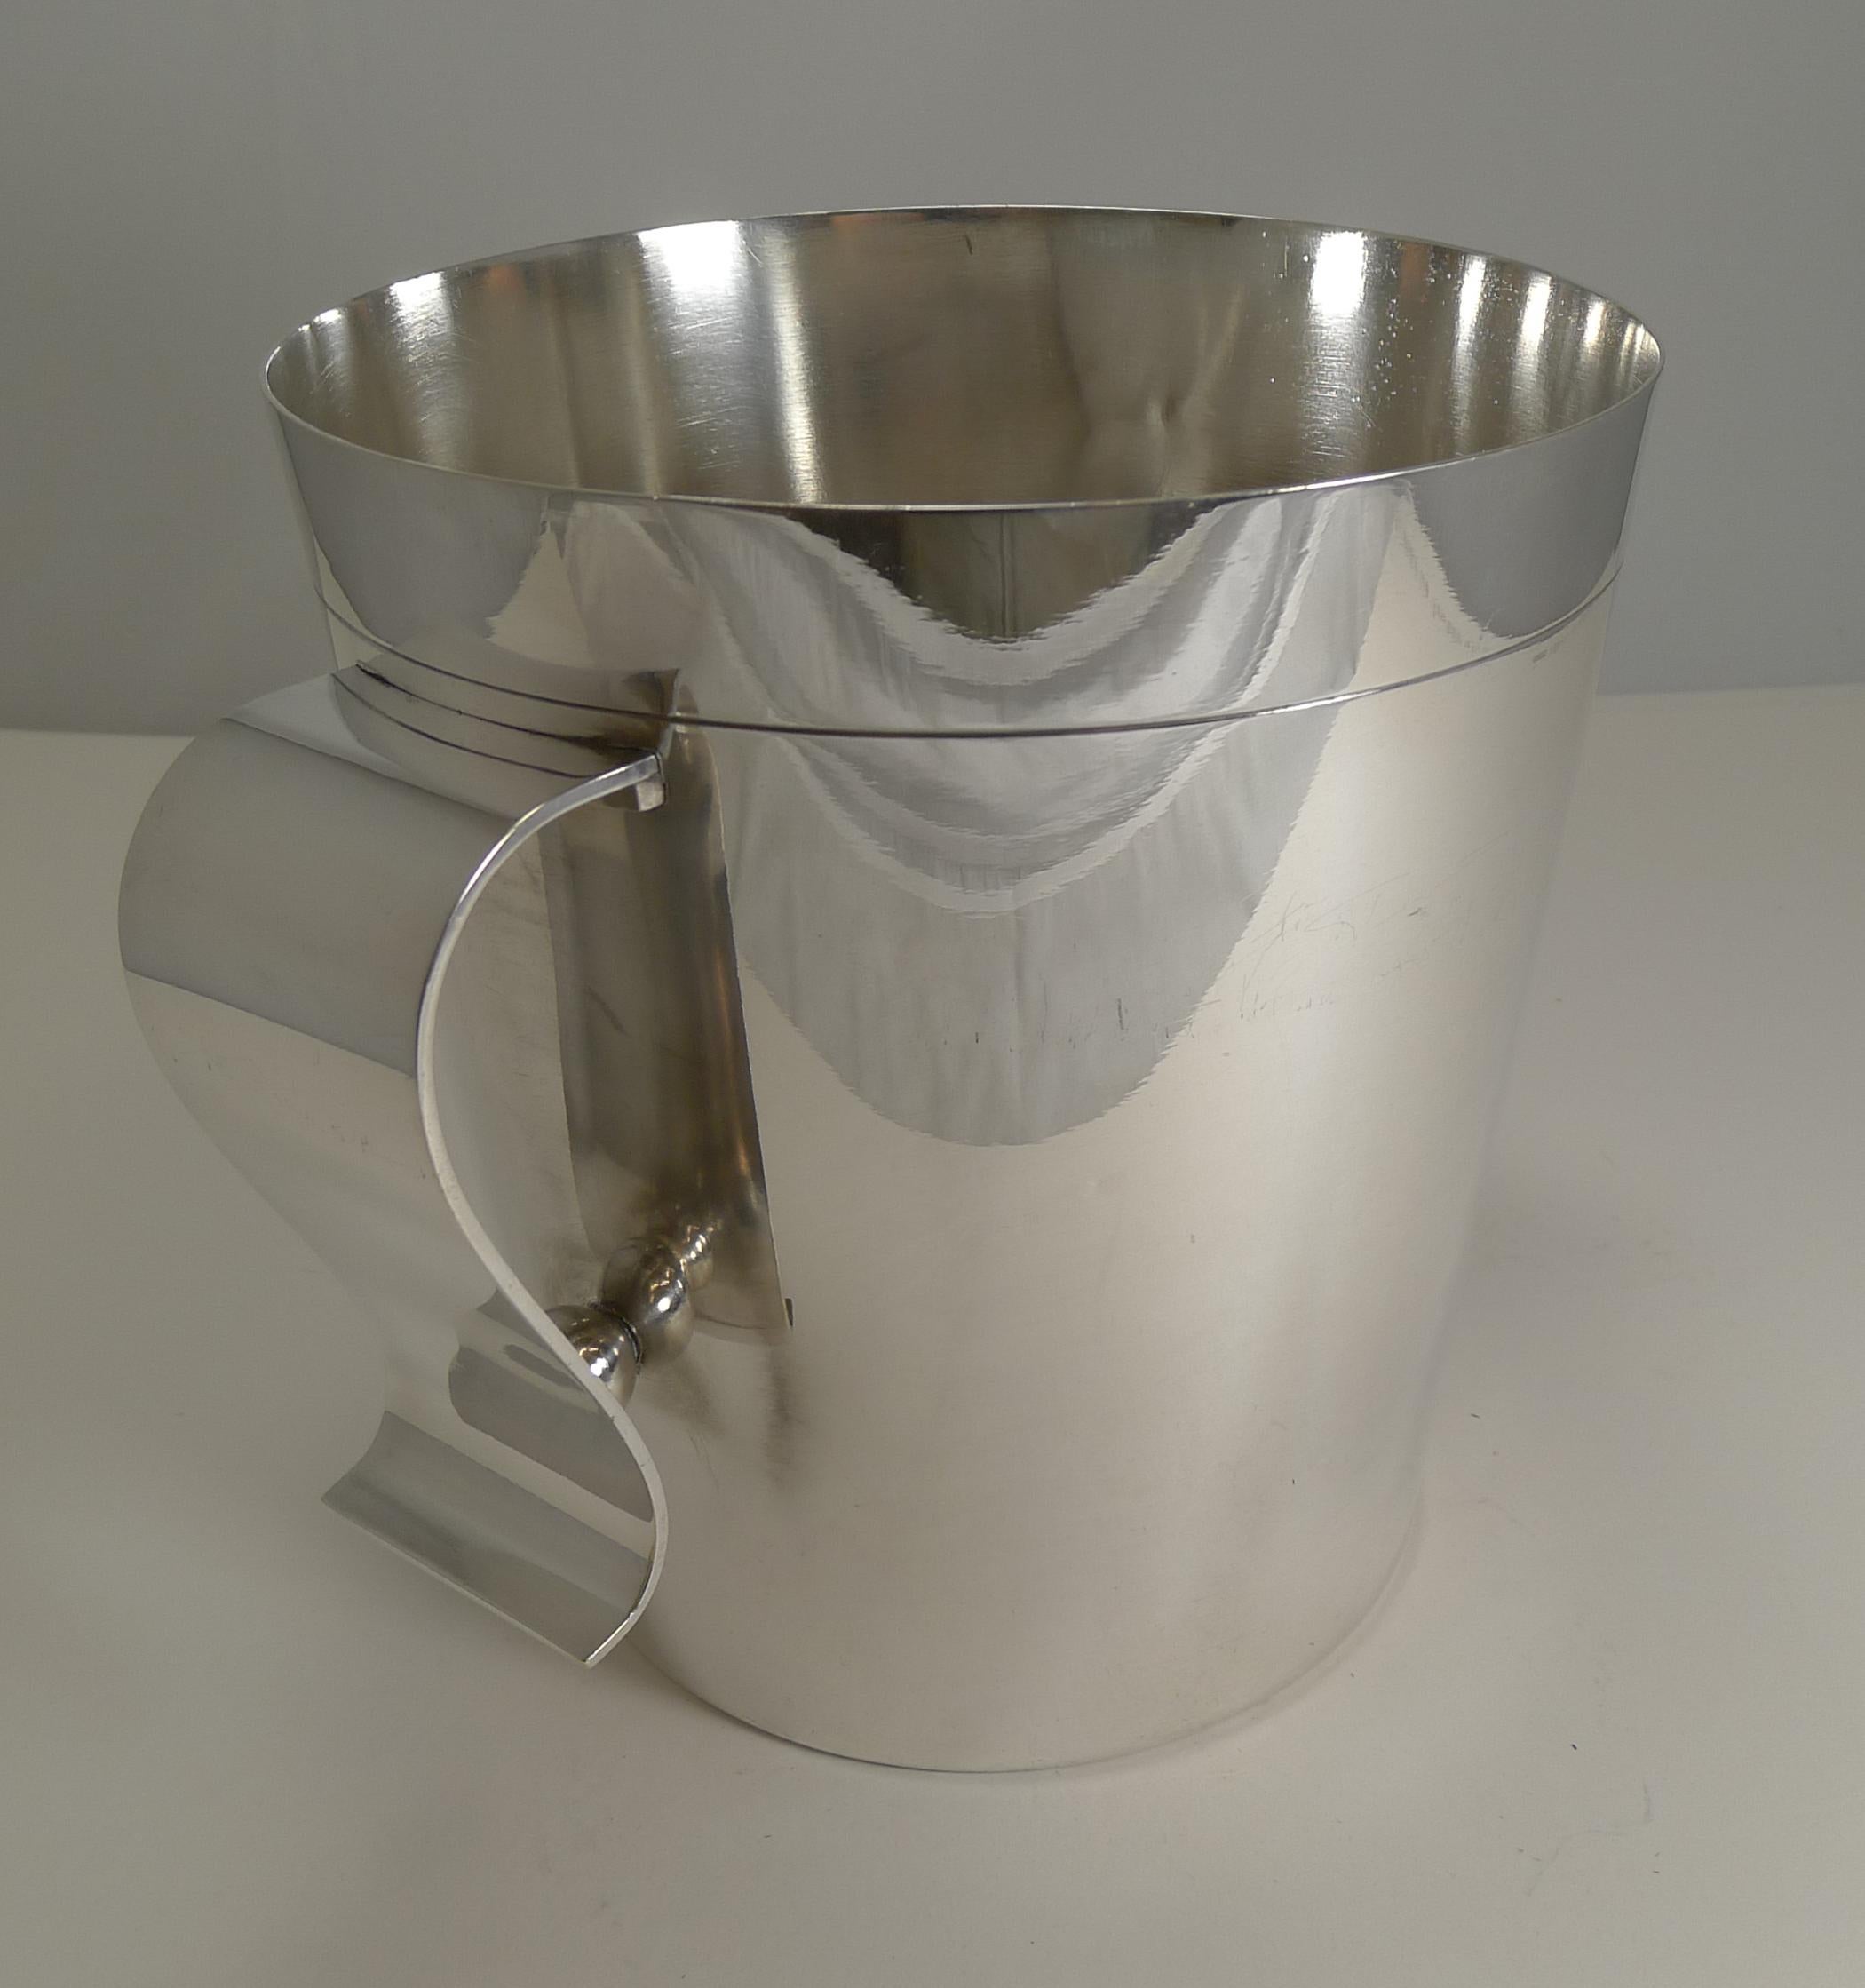 A scarce find in this design, this fabulous and stylish silver plated wine or champagne cooler is by the top-notch French silversmith, Christofle.

This design is by one of the most sought-after designers of the Art Deco era, Luc Lanel.

Dating